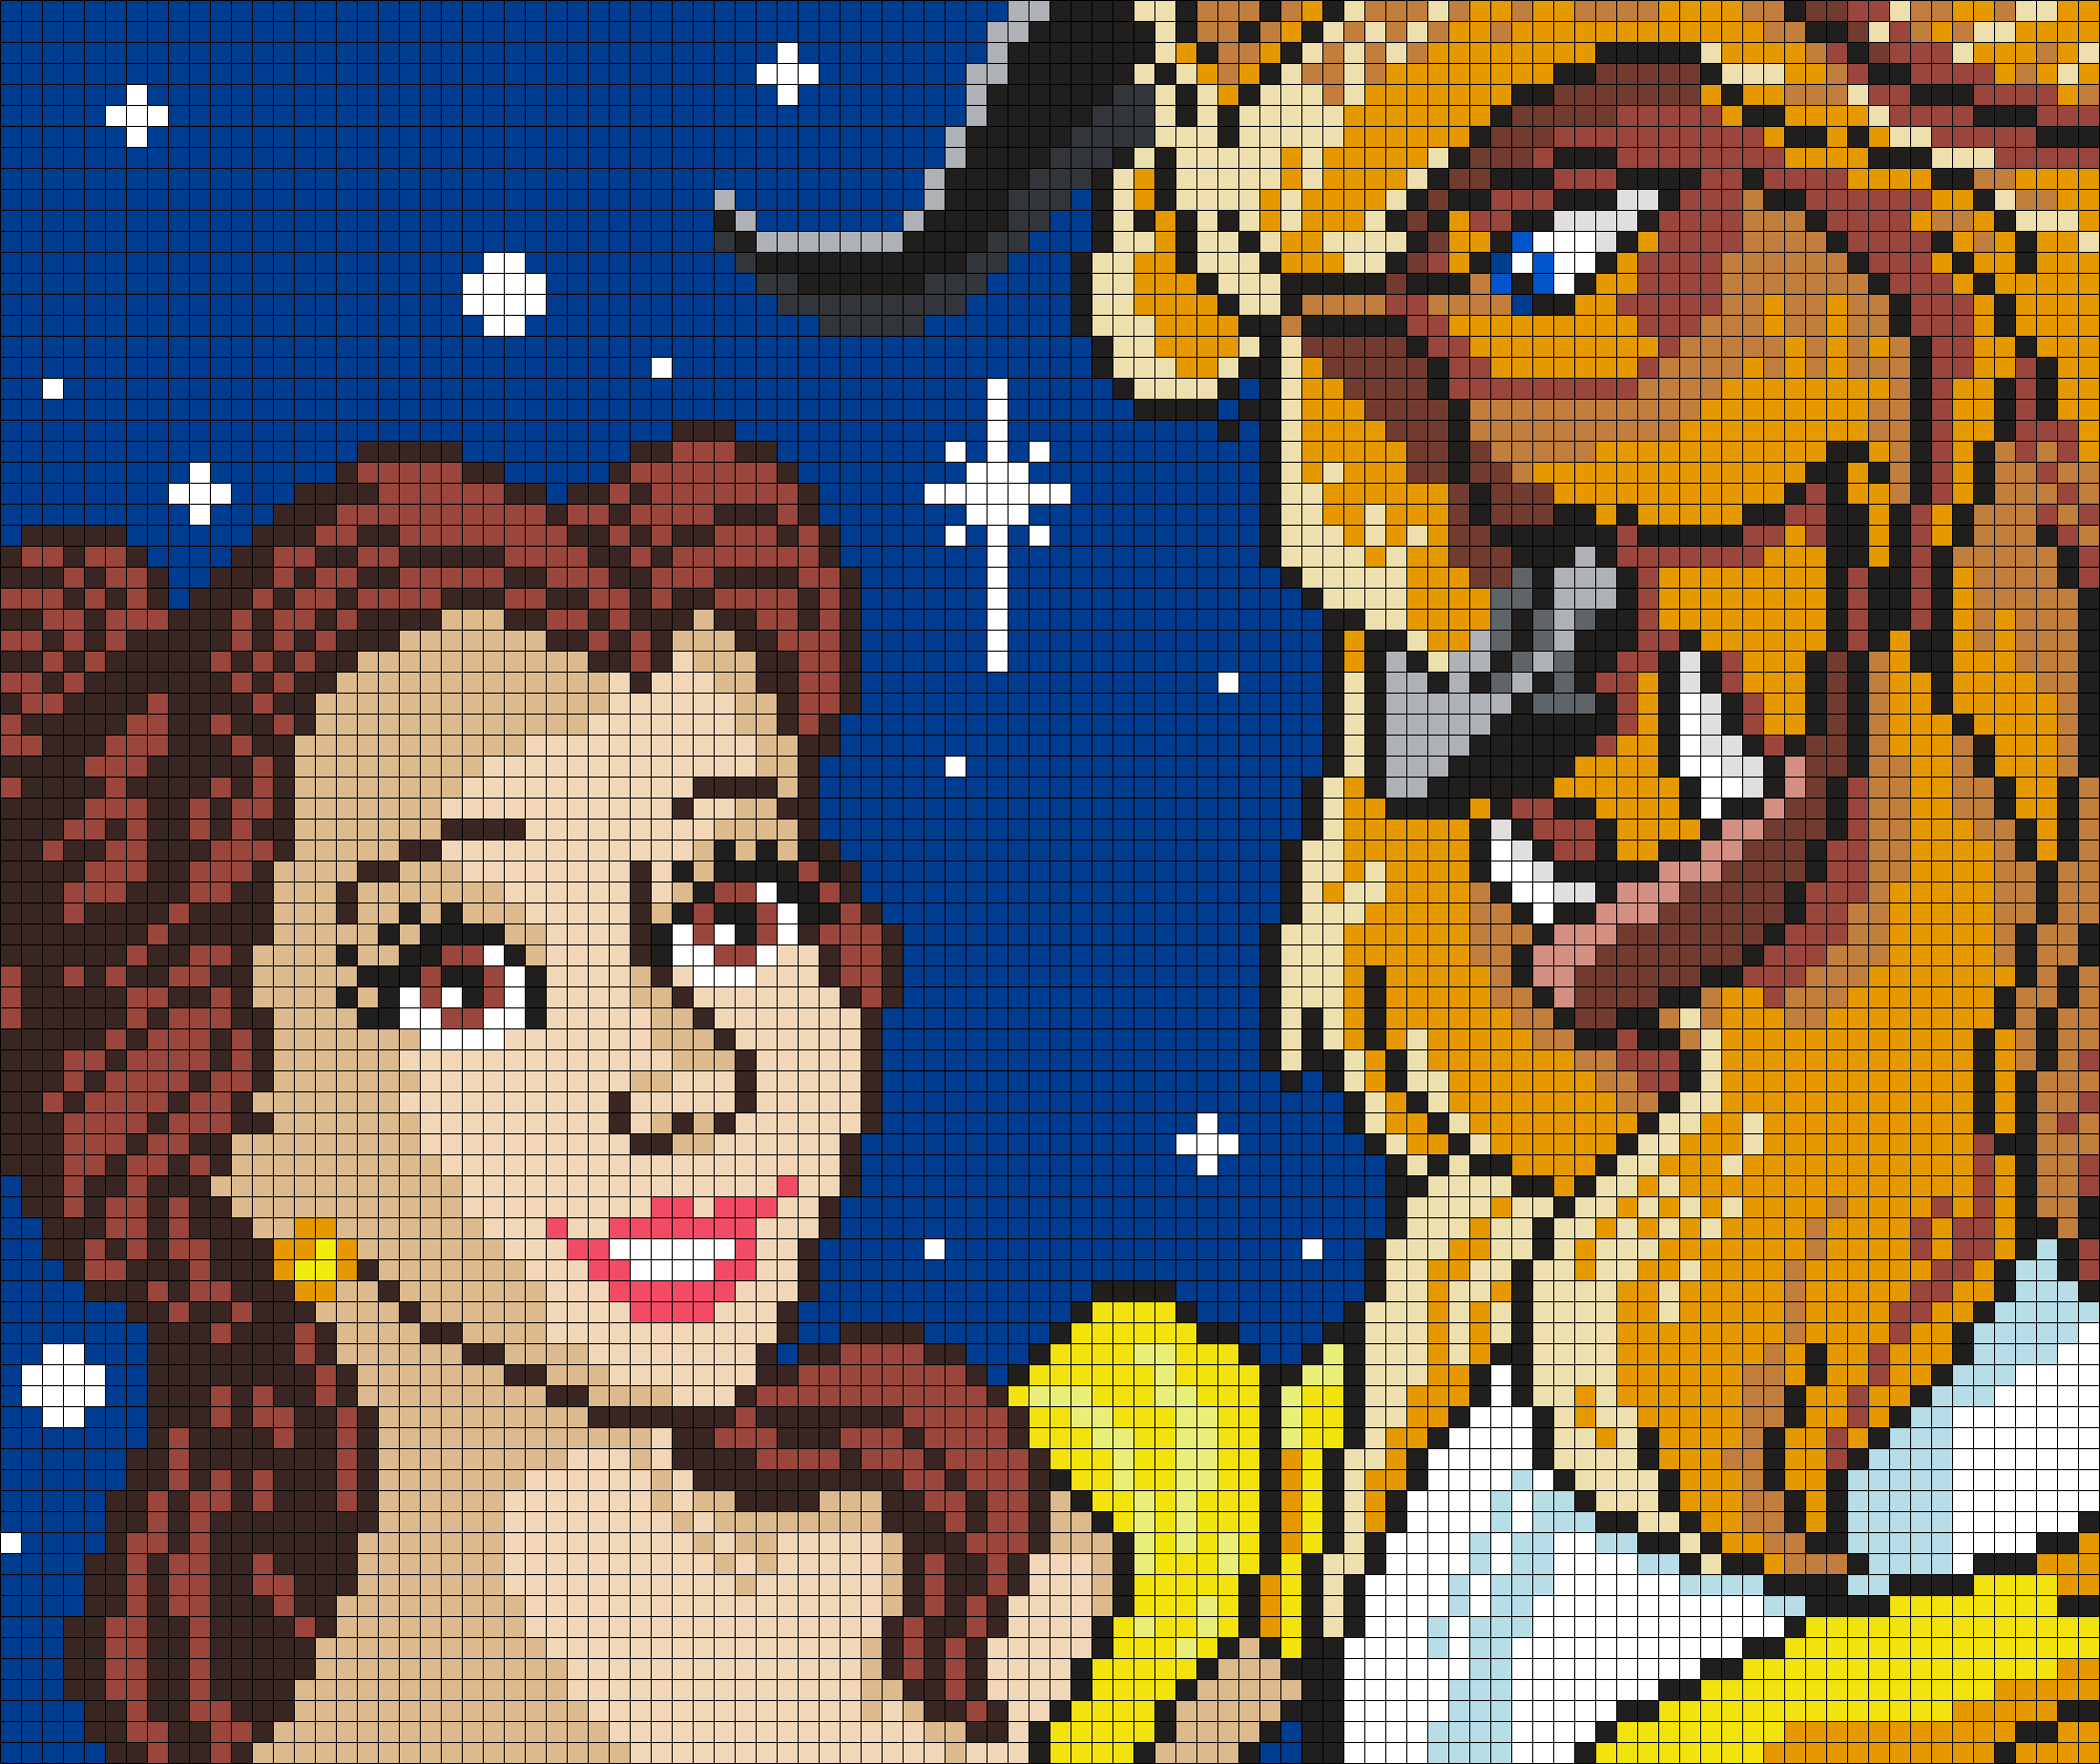 Beauty And The Beast (Square)